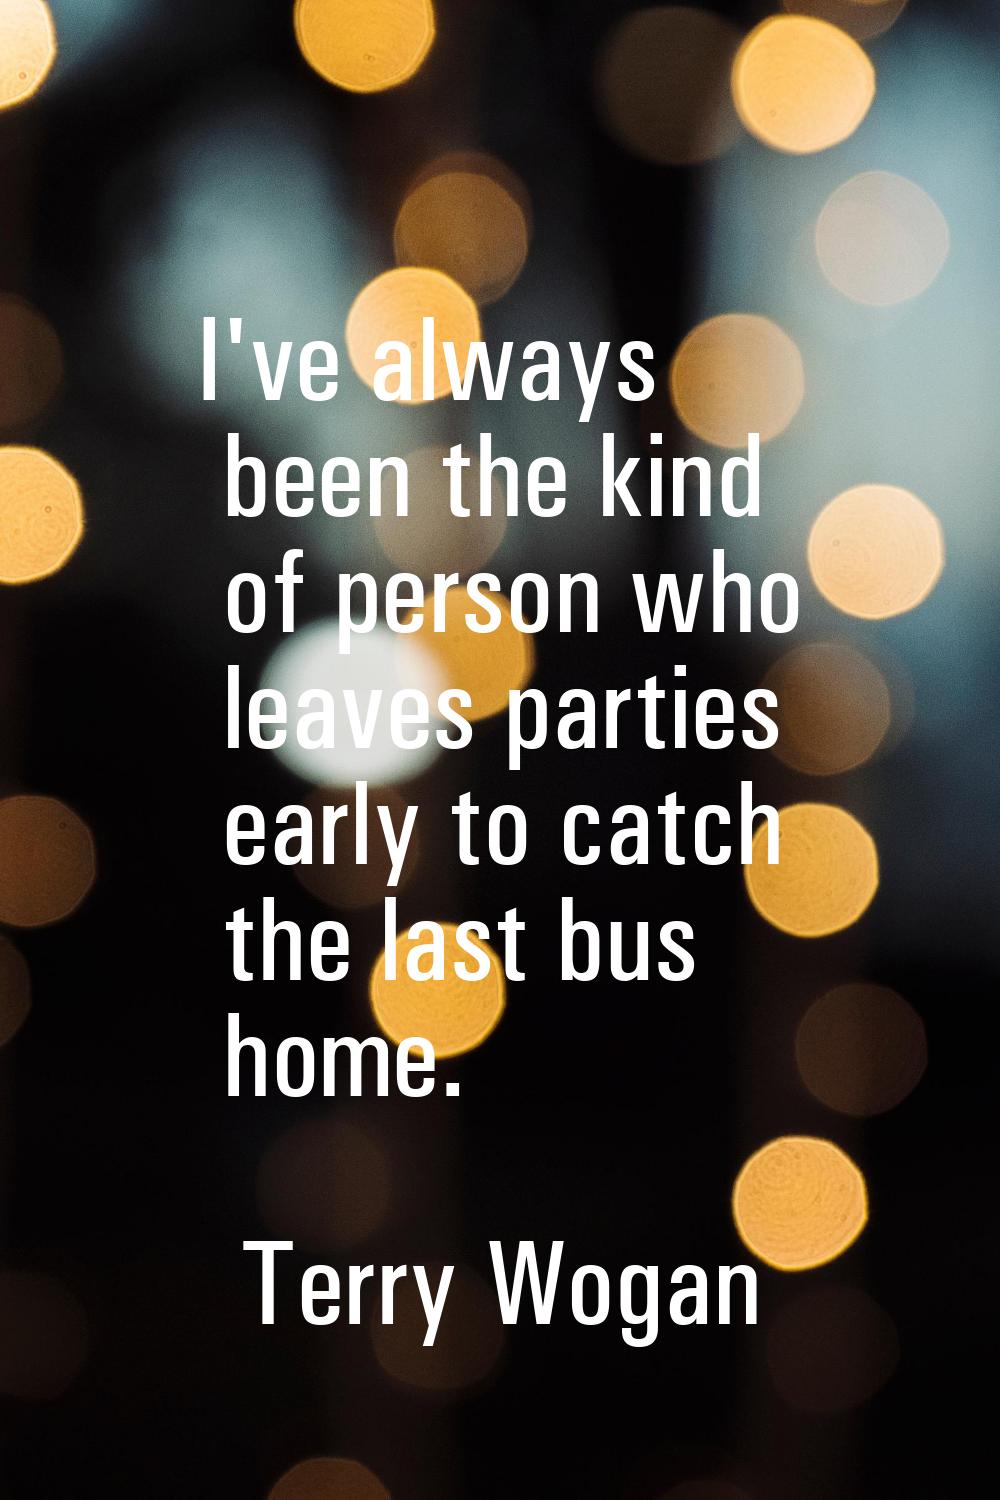 I've always been the kind of person who leaves parties early to catch the last bus home.